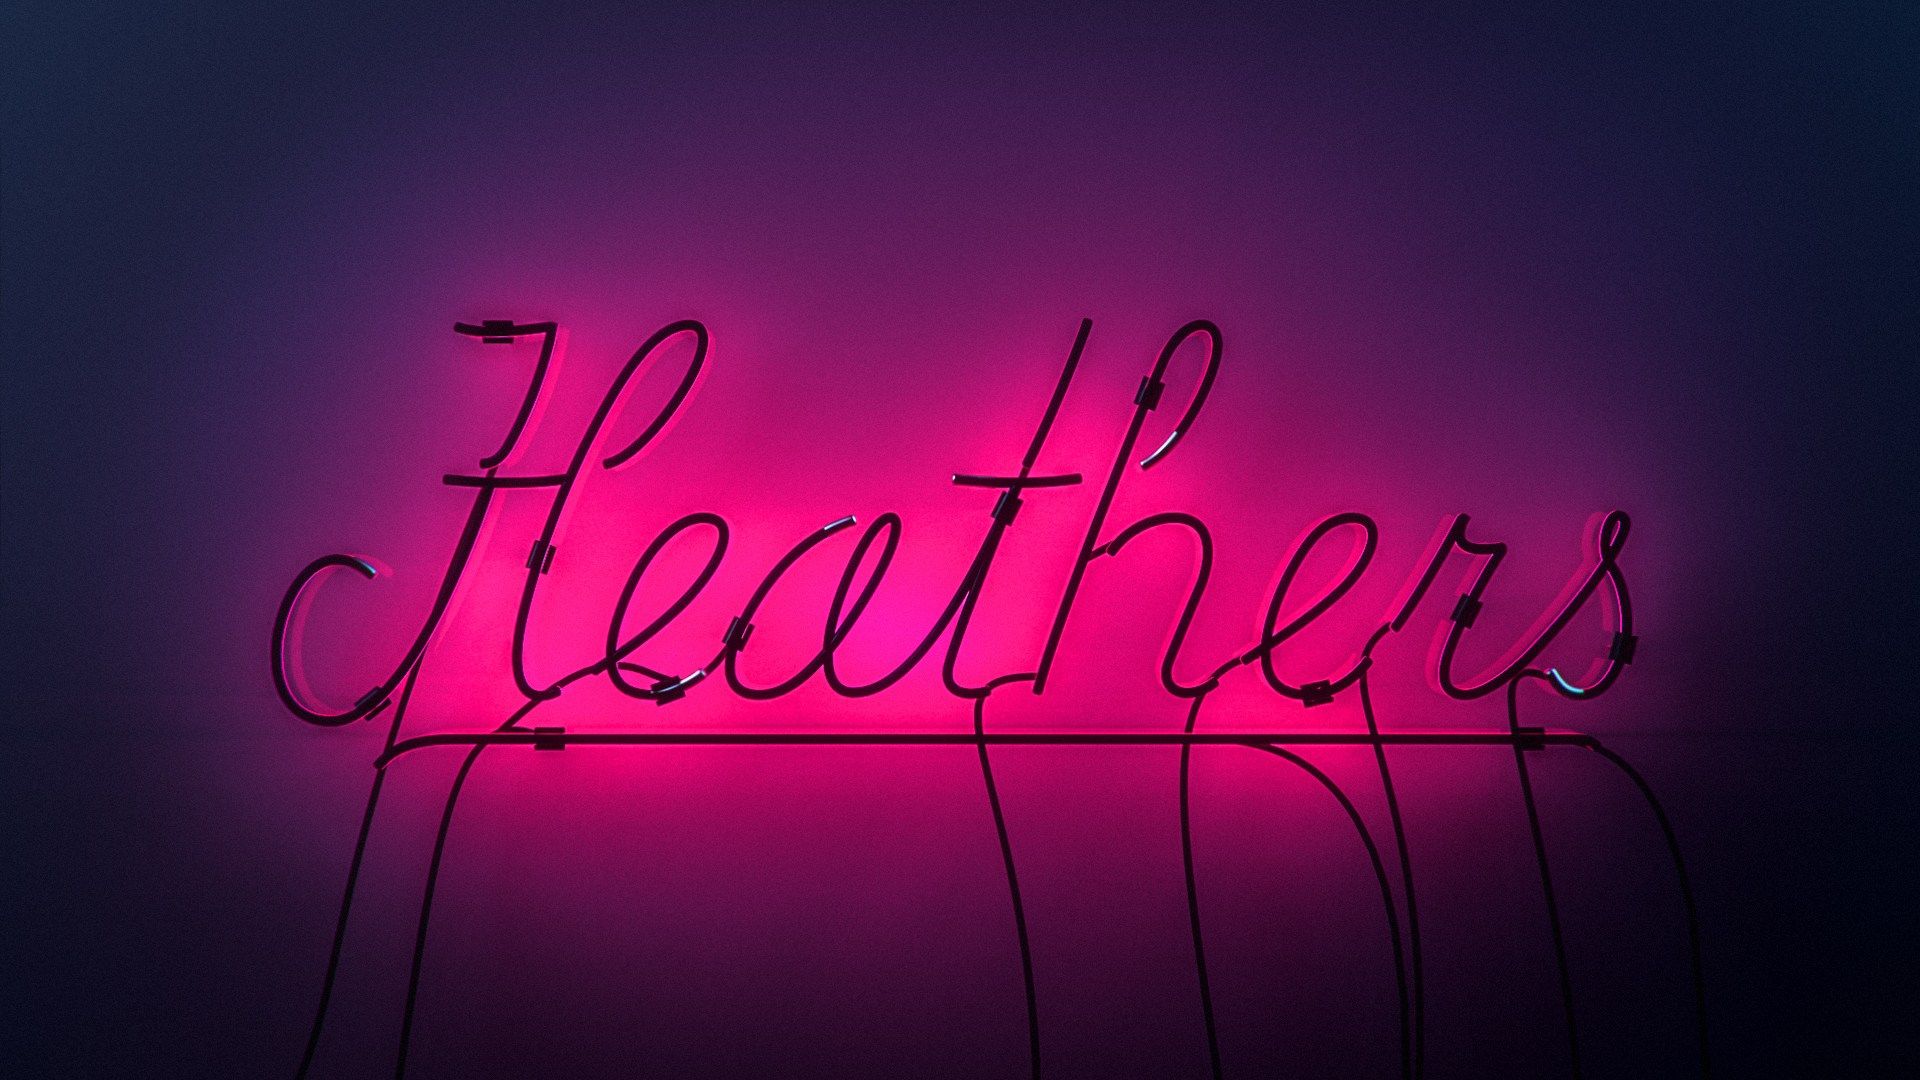 Heathers The Musical Wallpapers  Wallpaper Cave